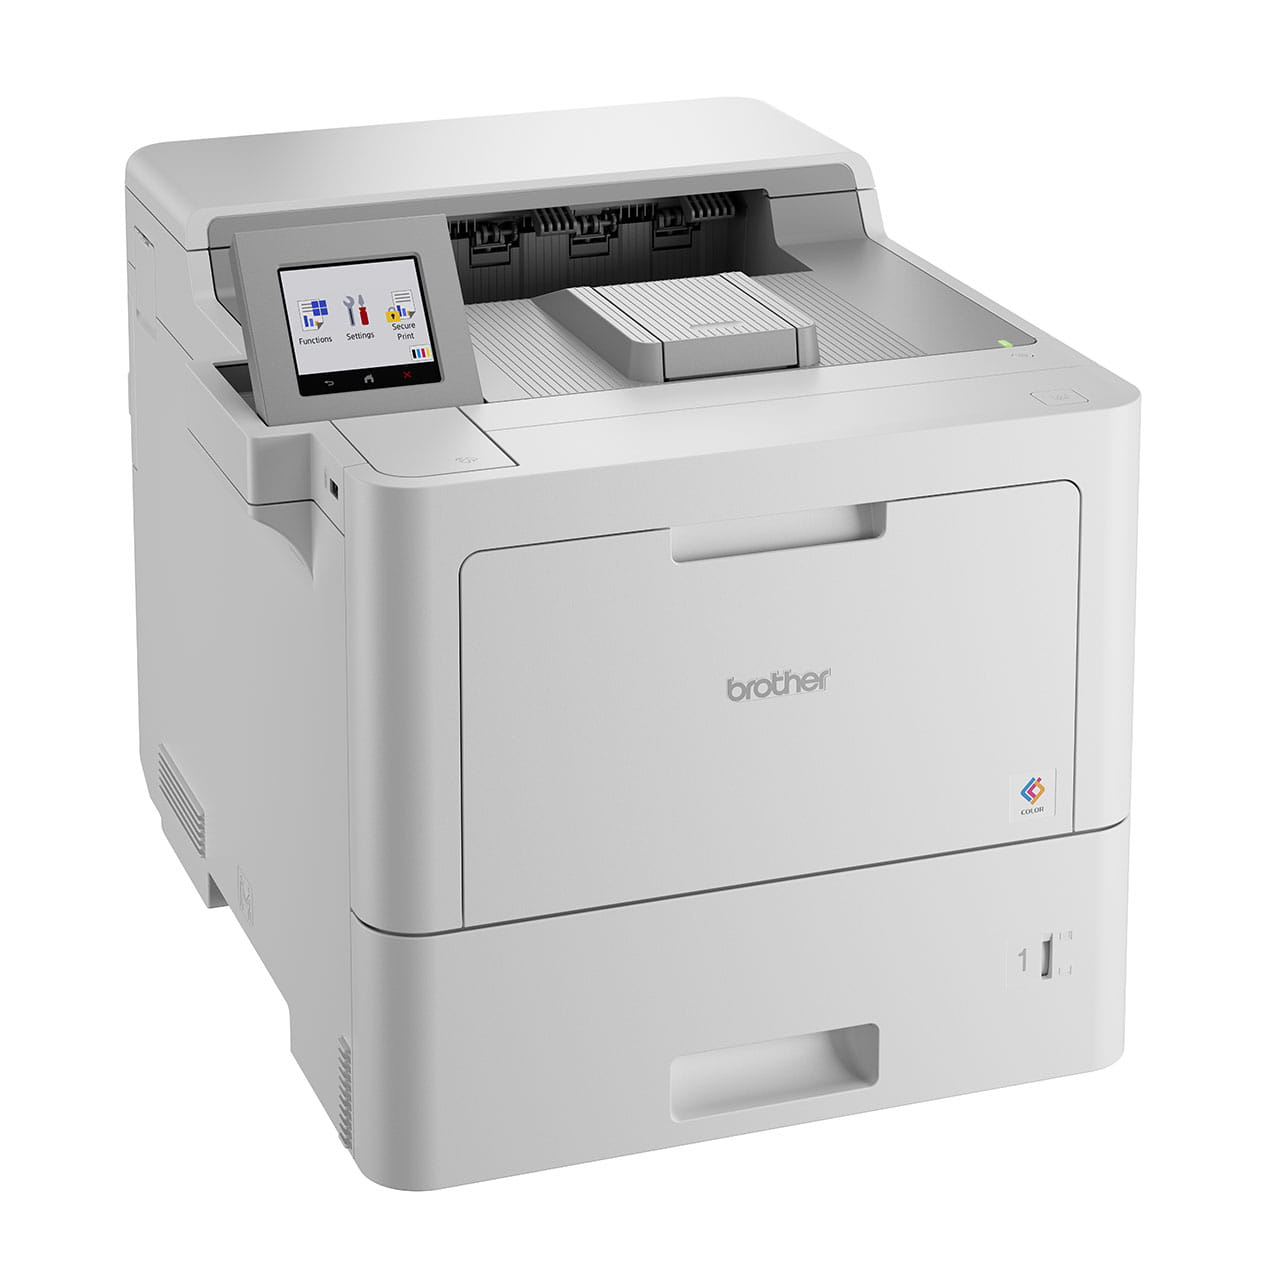 Brother HL-L9430CDN Colour Laser Printer Right Side View